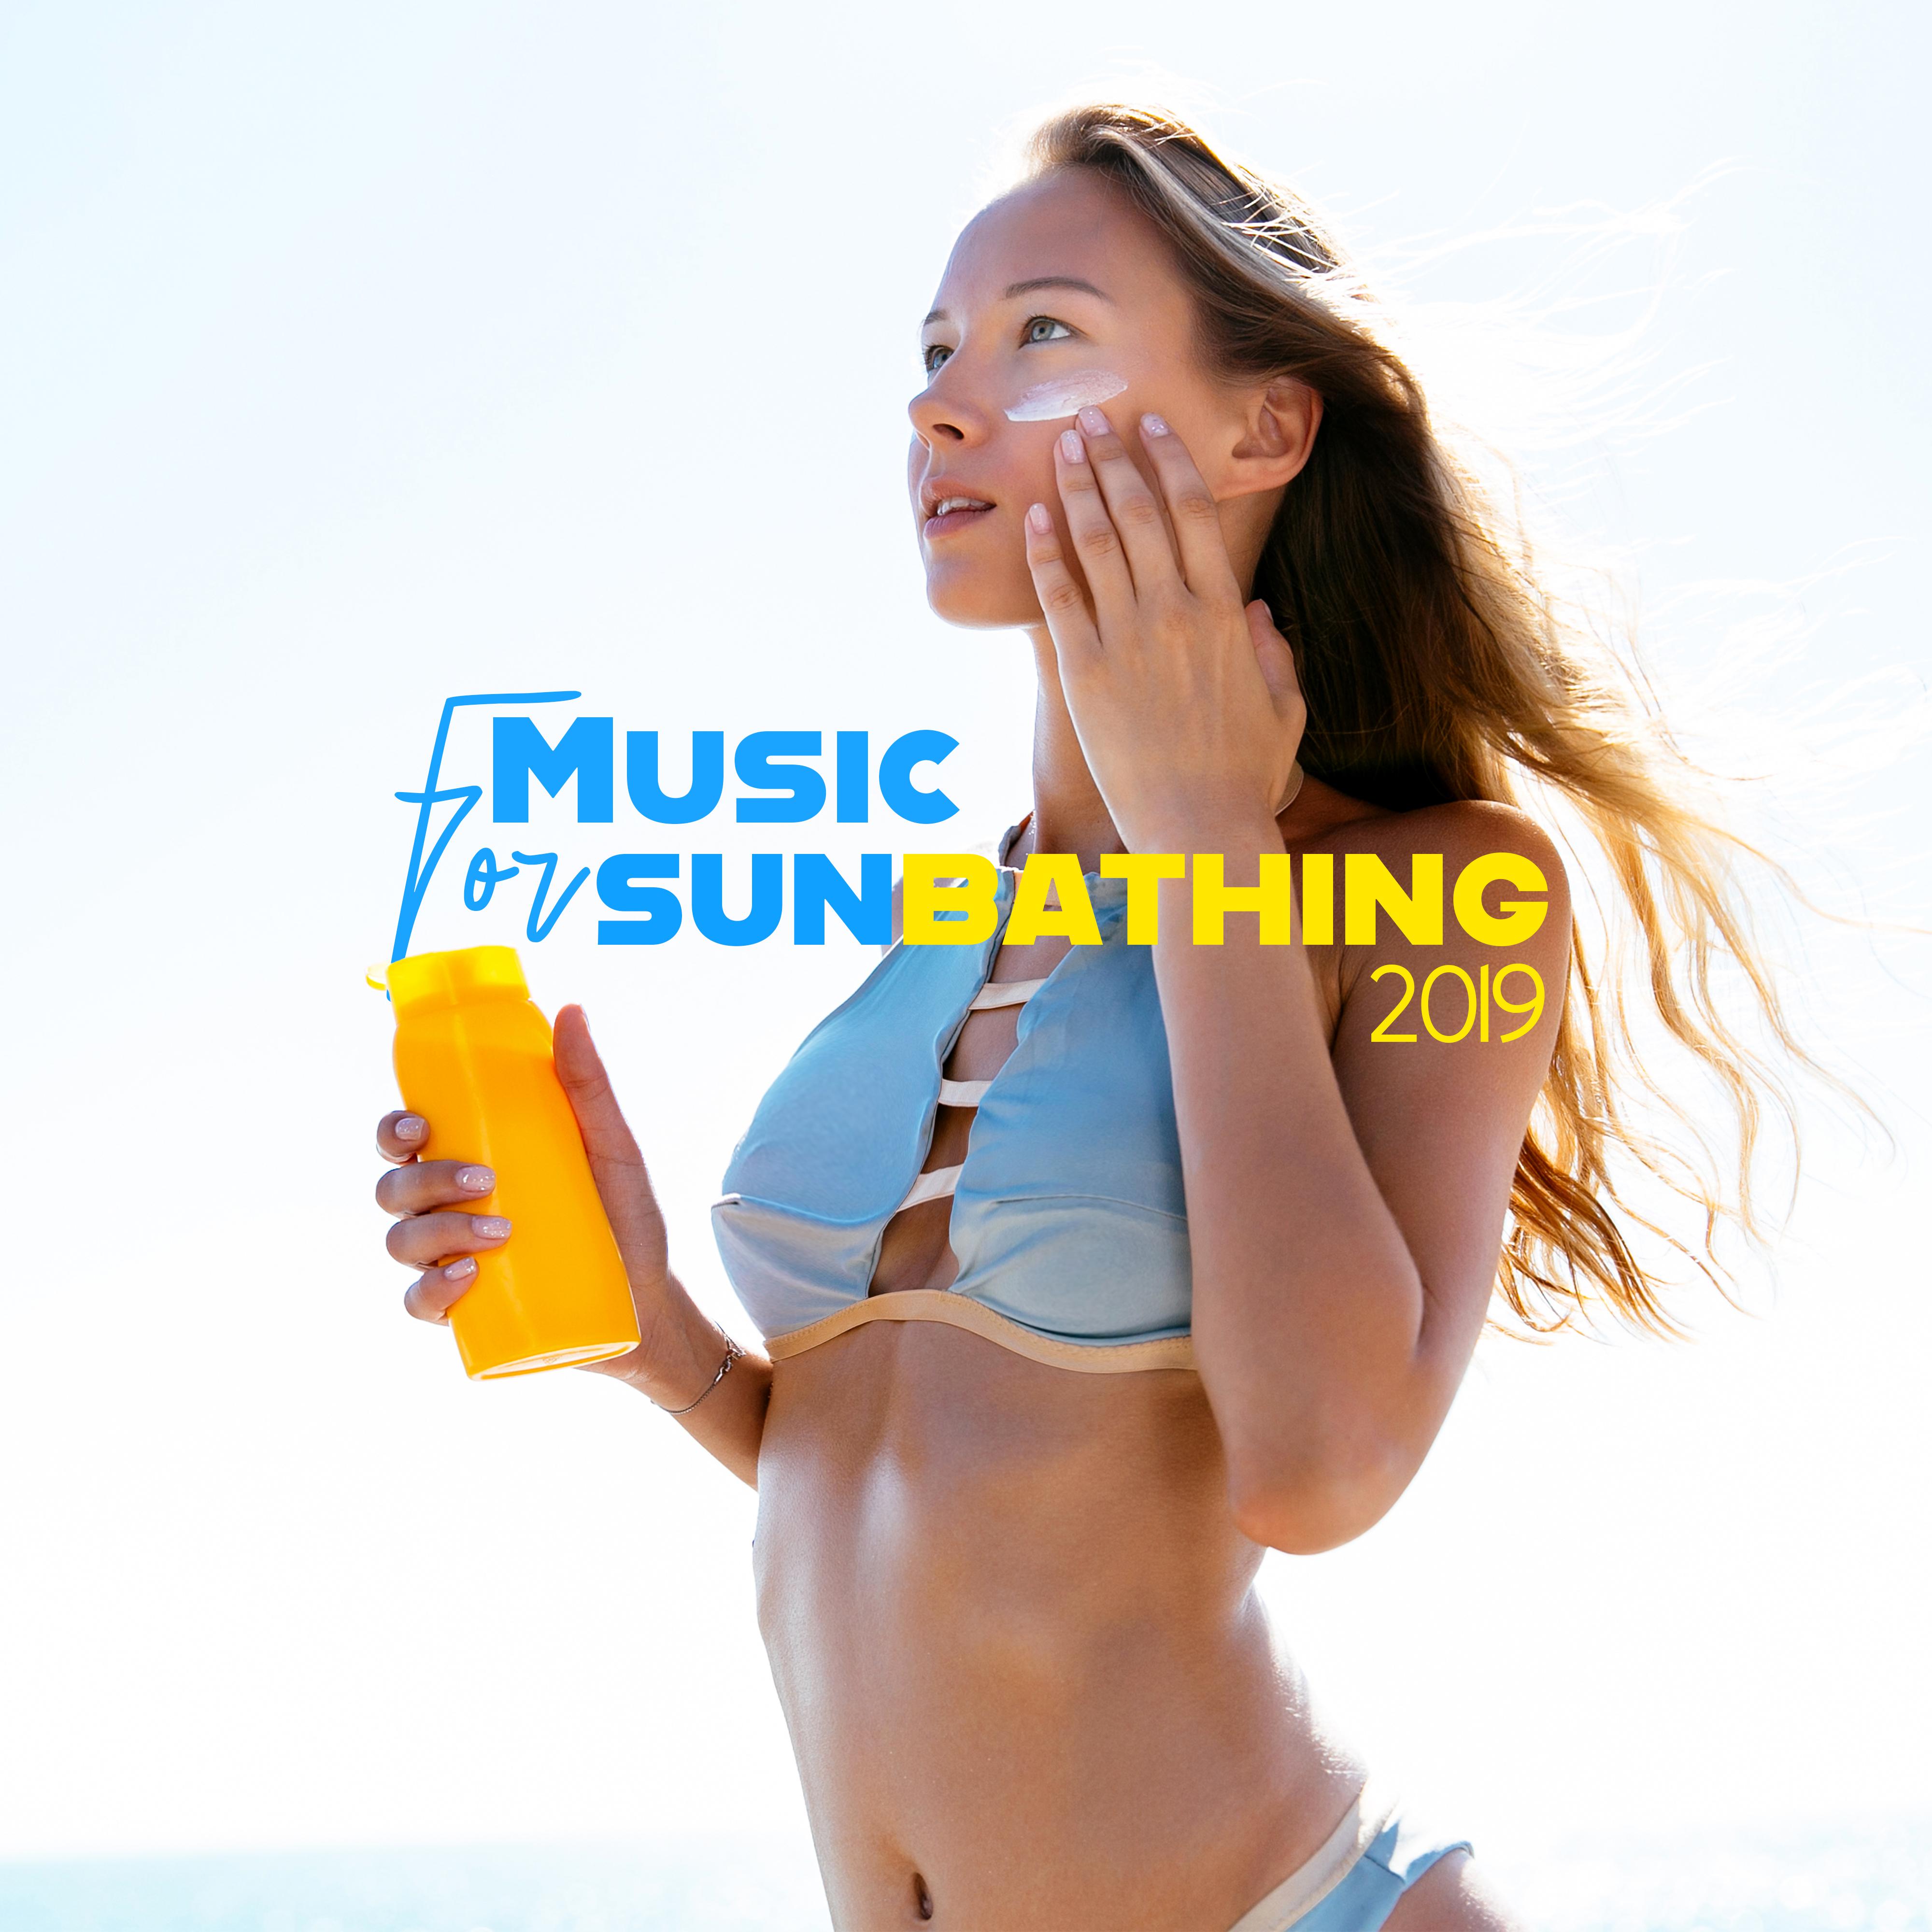 Music for Sunbathing 2019 – Modern Chillout Sounds, Summer Music, Relaxing Beats, Beach Chillout, Ibiza Relaxation, Lounge Music